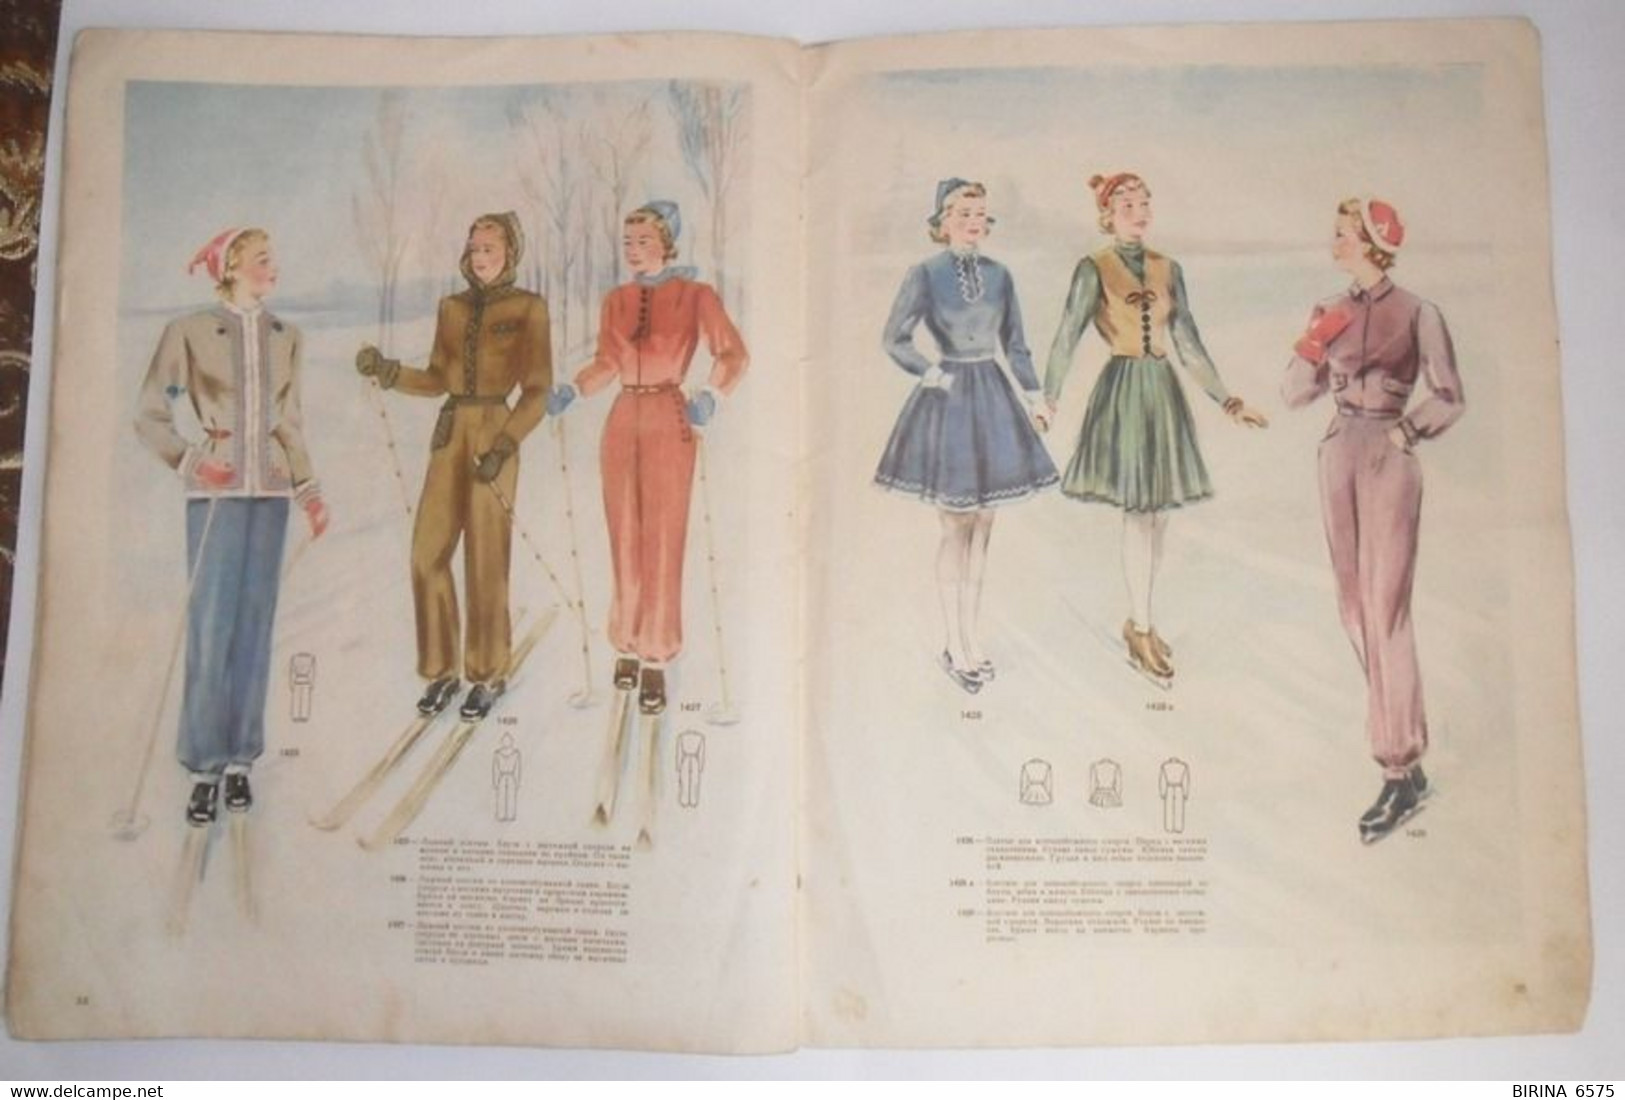 FASHION MAGAZINE. MOSCOW CENTRAL DEPARTMENT STORE. MINISTRY OF TRADE OF THE USSR. 1953. - 2-41-i